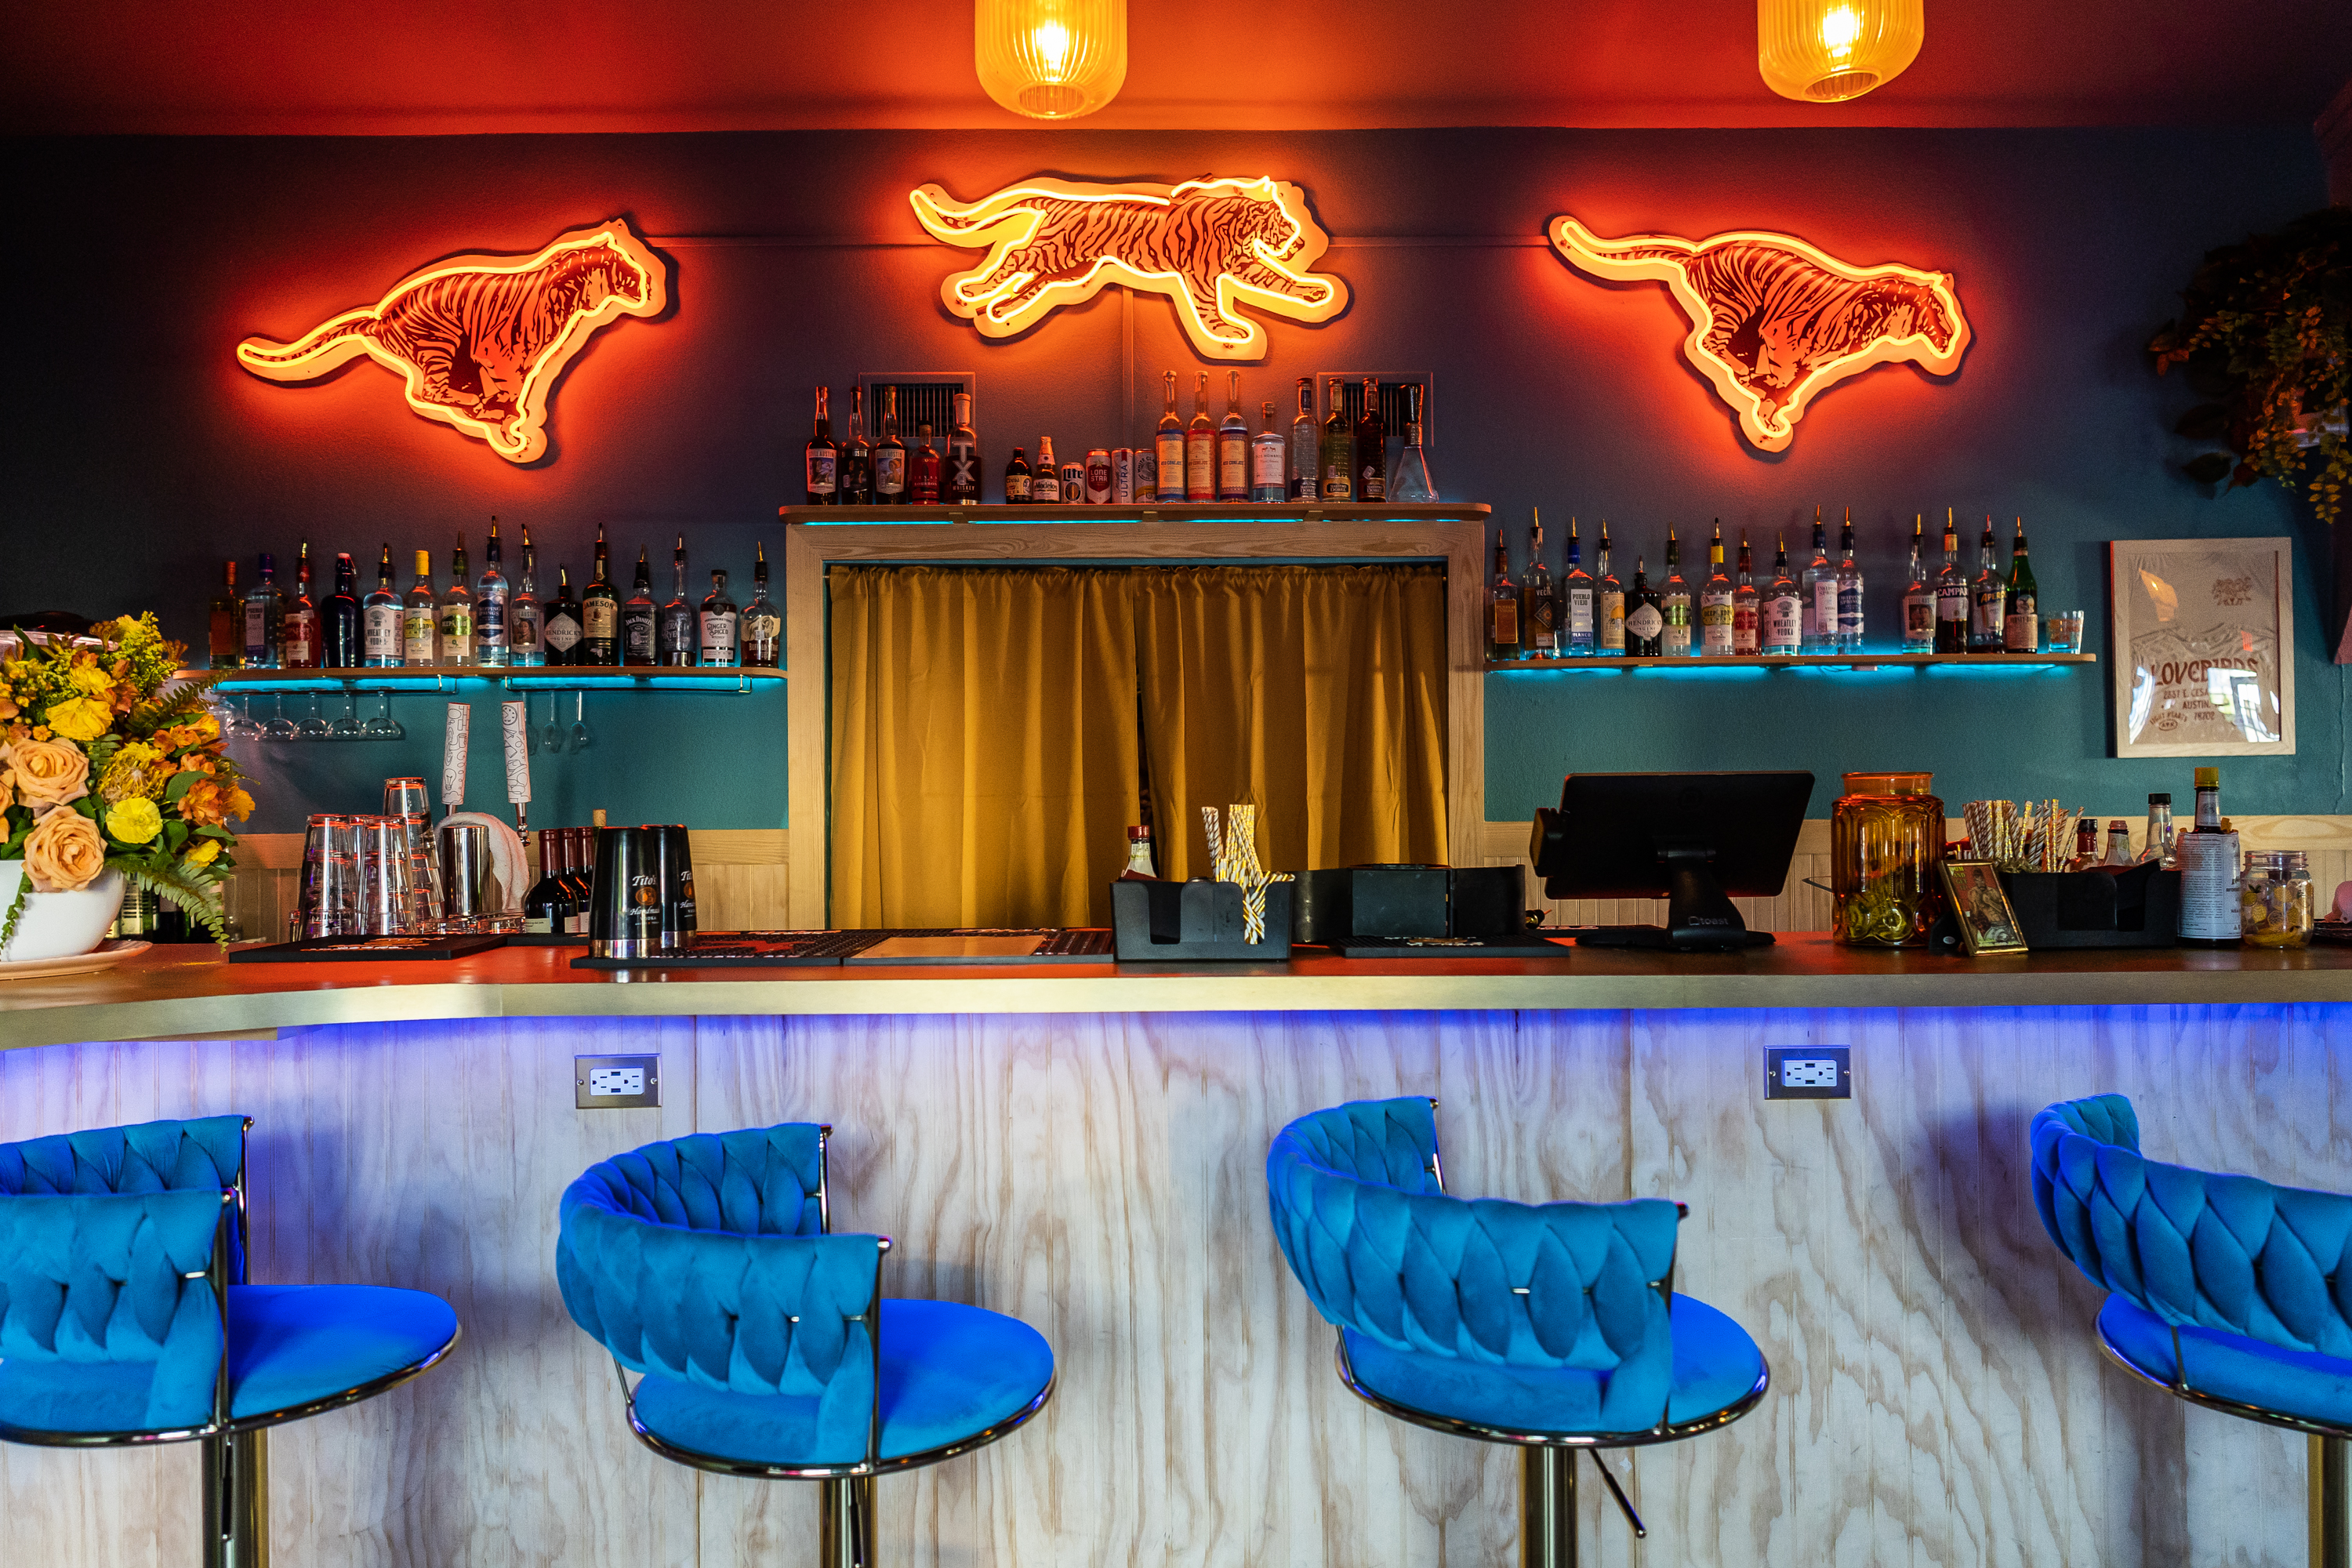 A cocktail bar with blue-clothed bar stools and neon tigers on the wall above the bottle shelves.